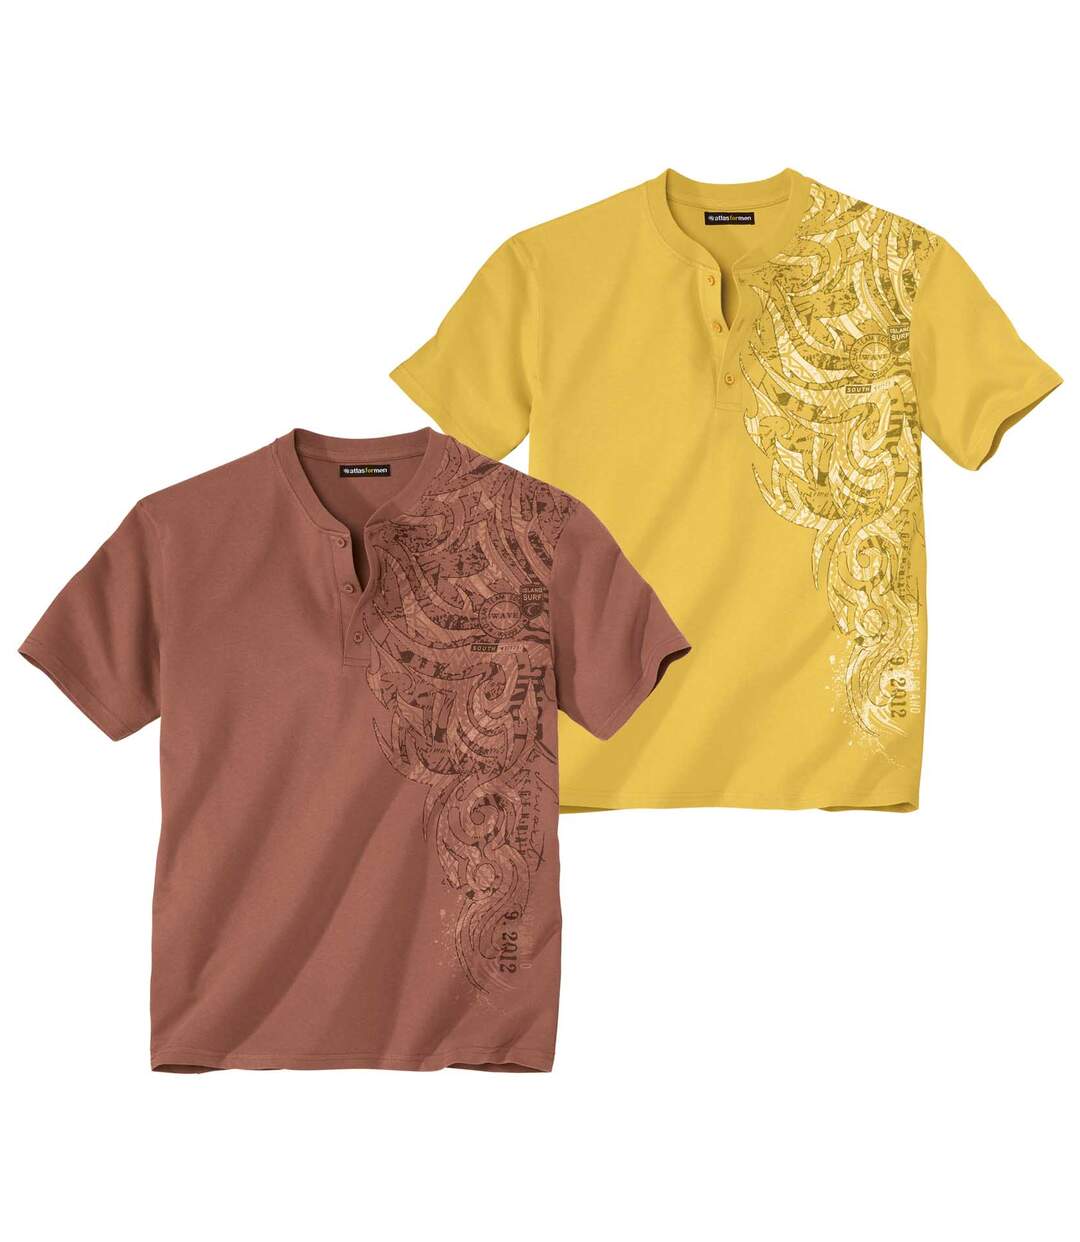 Pack of 2 Men's Button-Neck T-Shirts - Yellow Brick Red Atlas For Men